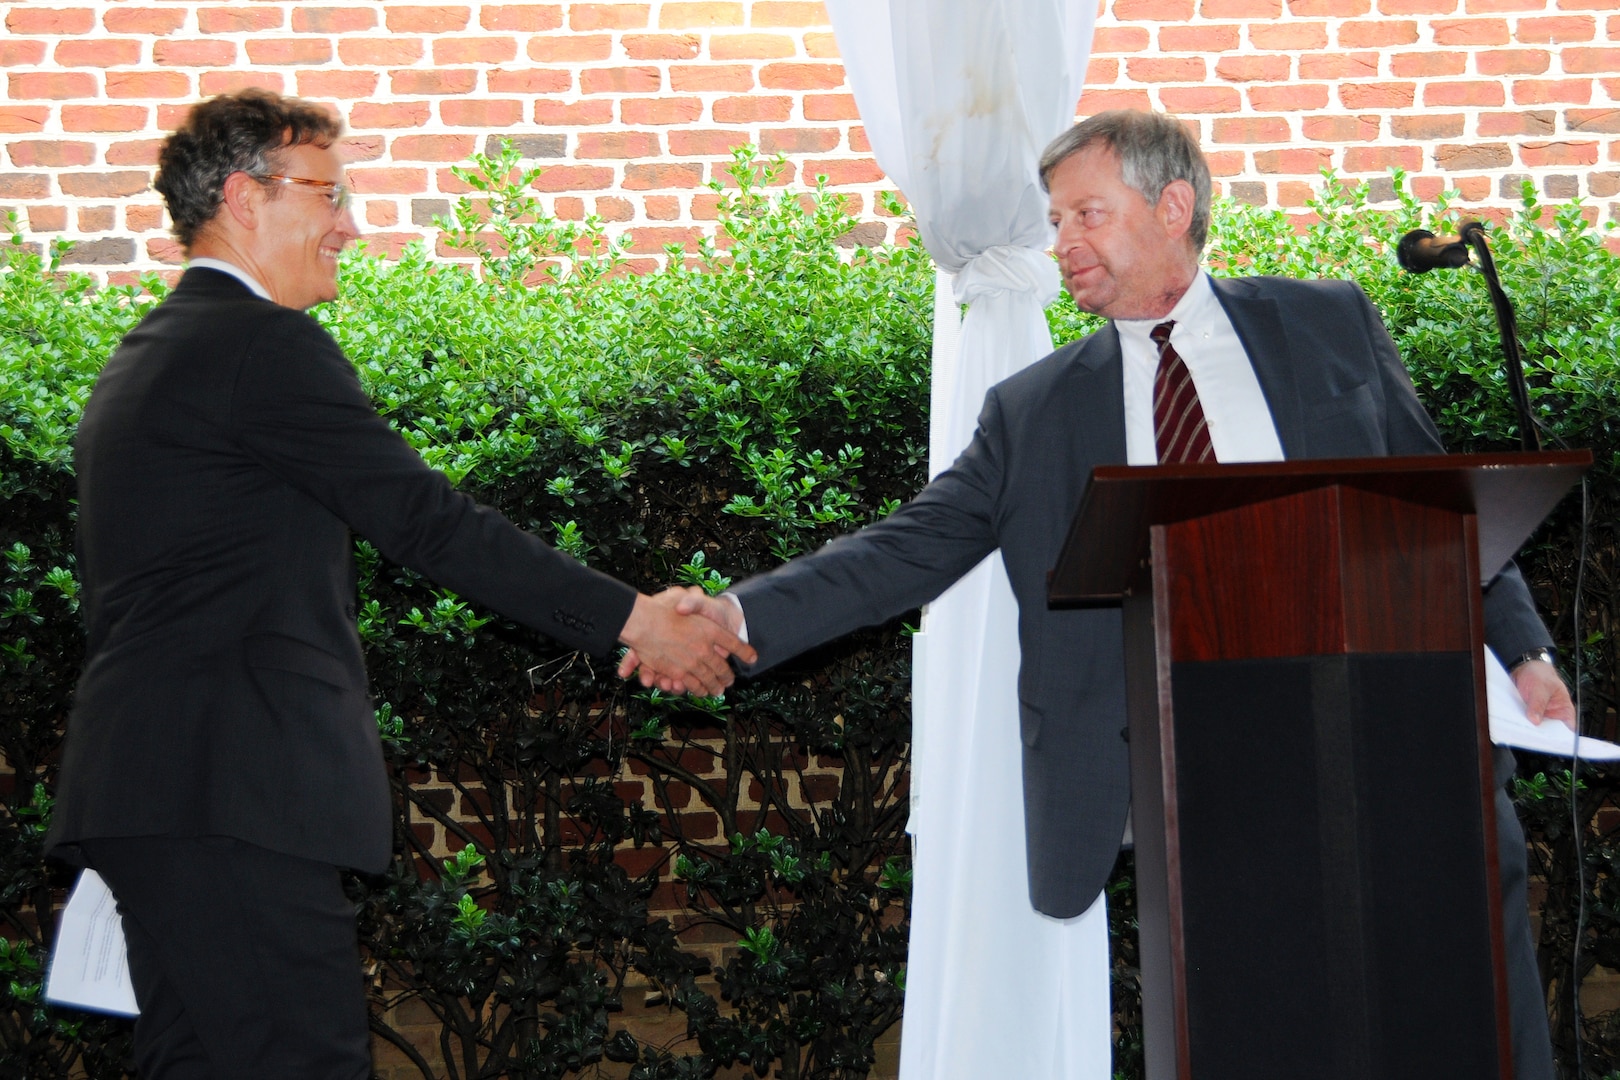 Two men shake hands behind a lectern.